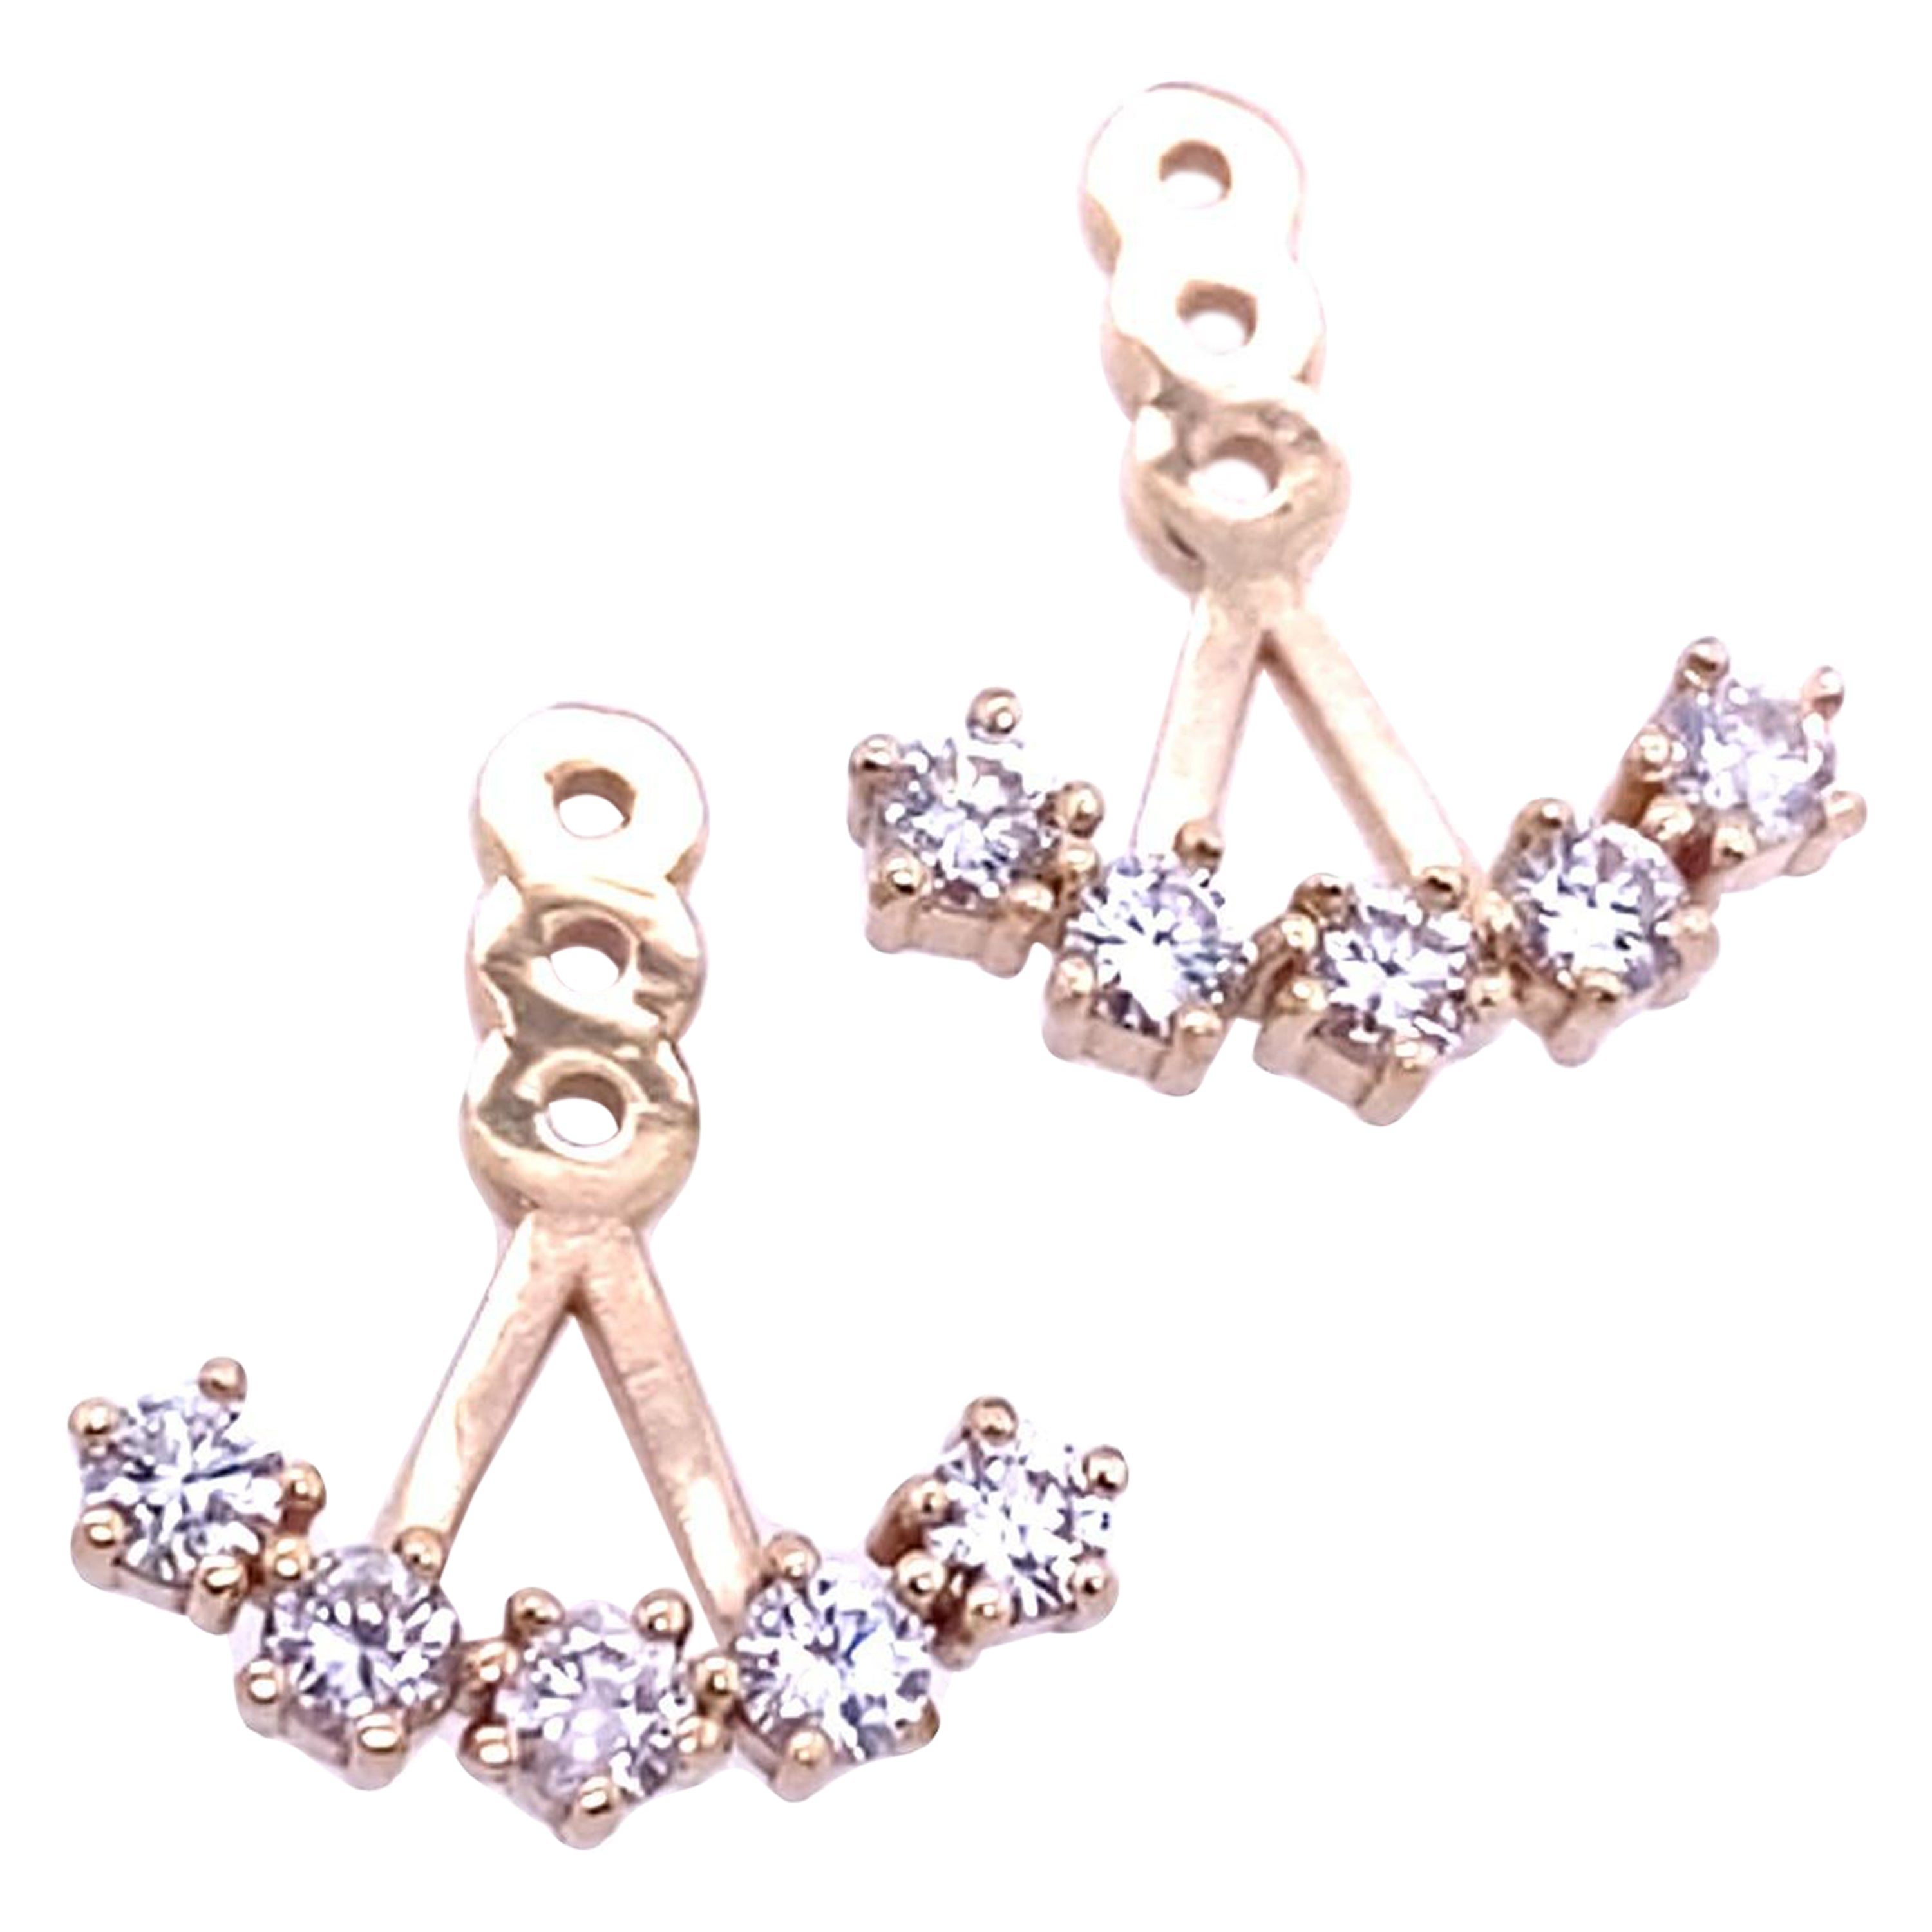 14ct Yellow Gold Earring Jackets fit Behind any Stud Earring, set with 0.40ct For Sale